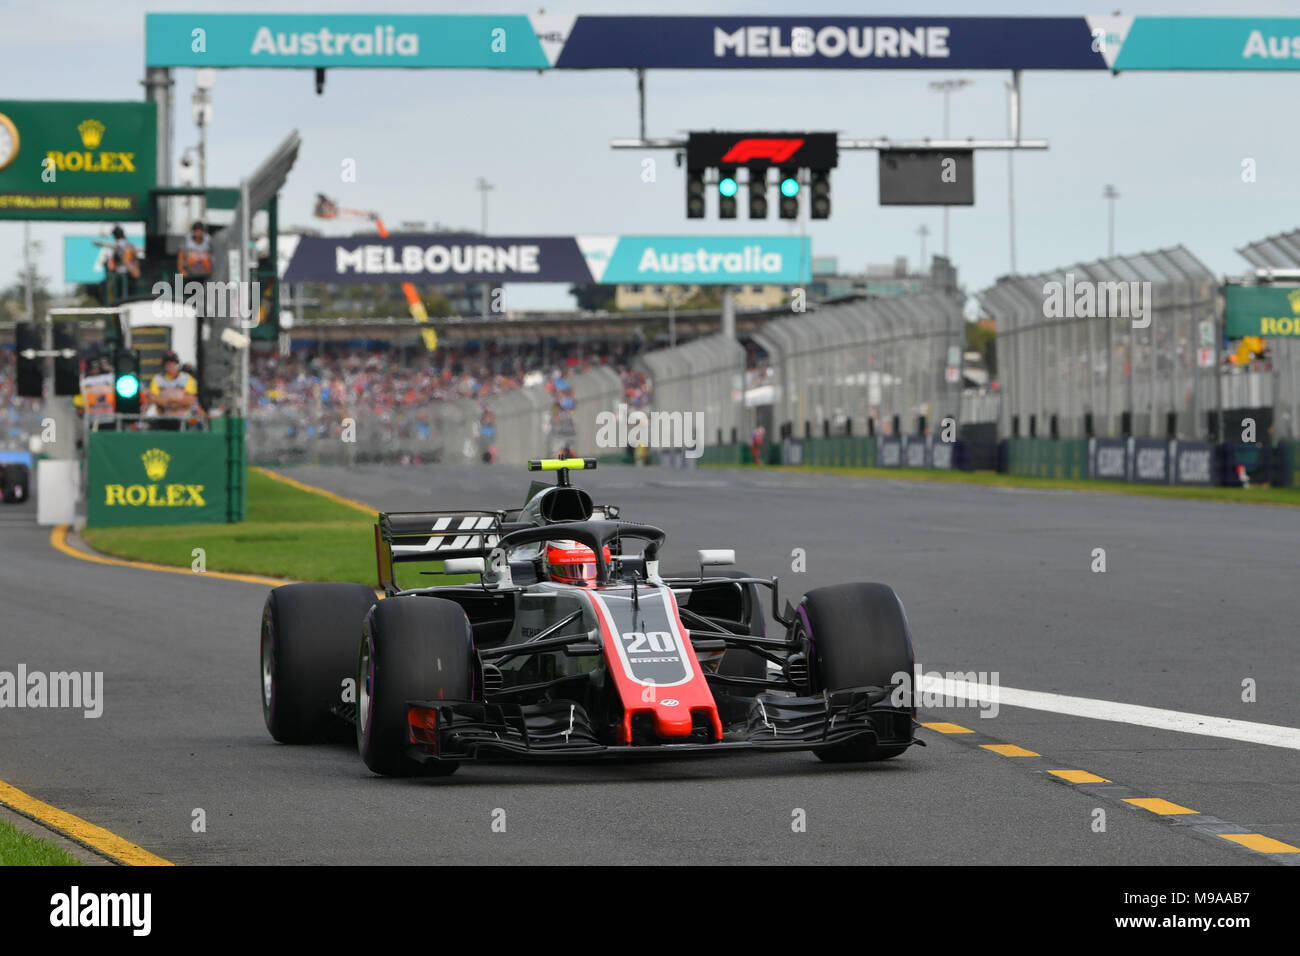 Albert Park, Melbourne, Australia. 24th Mar, 2018. Kevin Magnussen (DEN) #20 from the Haas F1 Team leaves the pit for his qualifying lap at the 2018 Australian Formula One Grand Prix at Albert Park, Melbourne, Australia. Sydney Low/Cal Sport Media/Alamy Live News Stock Photo